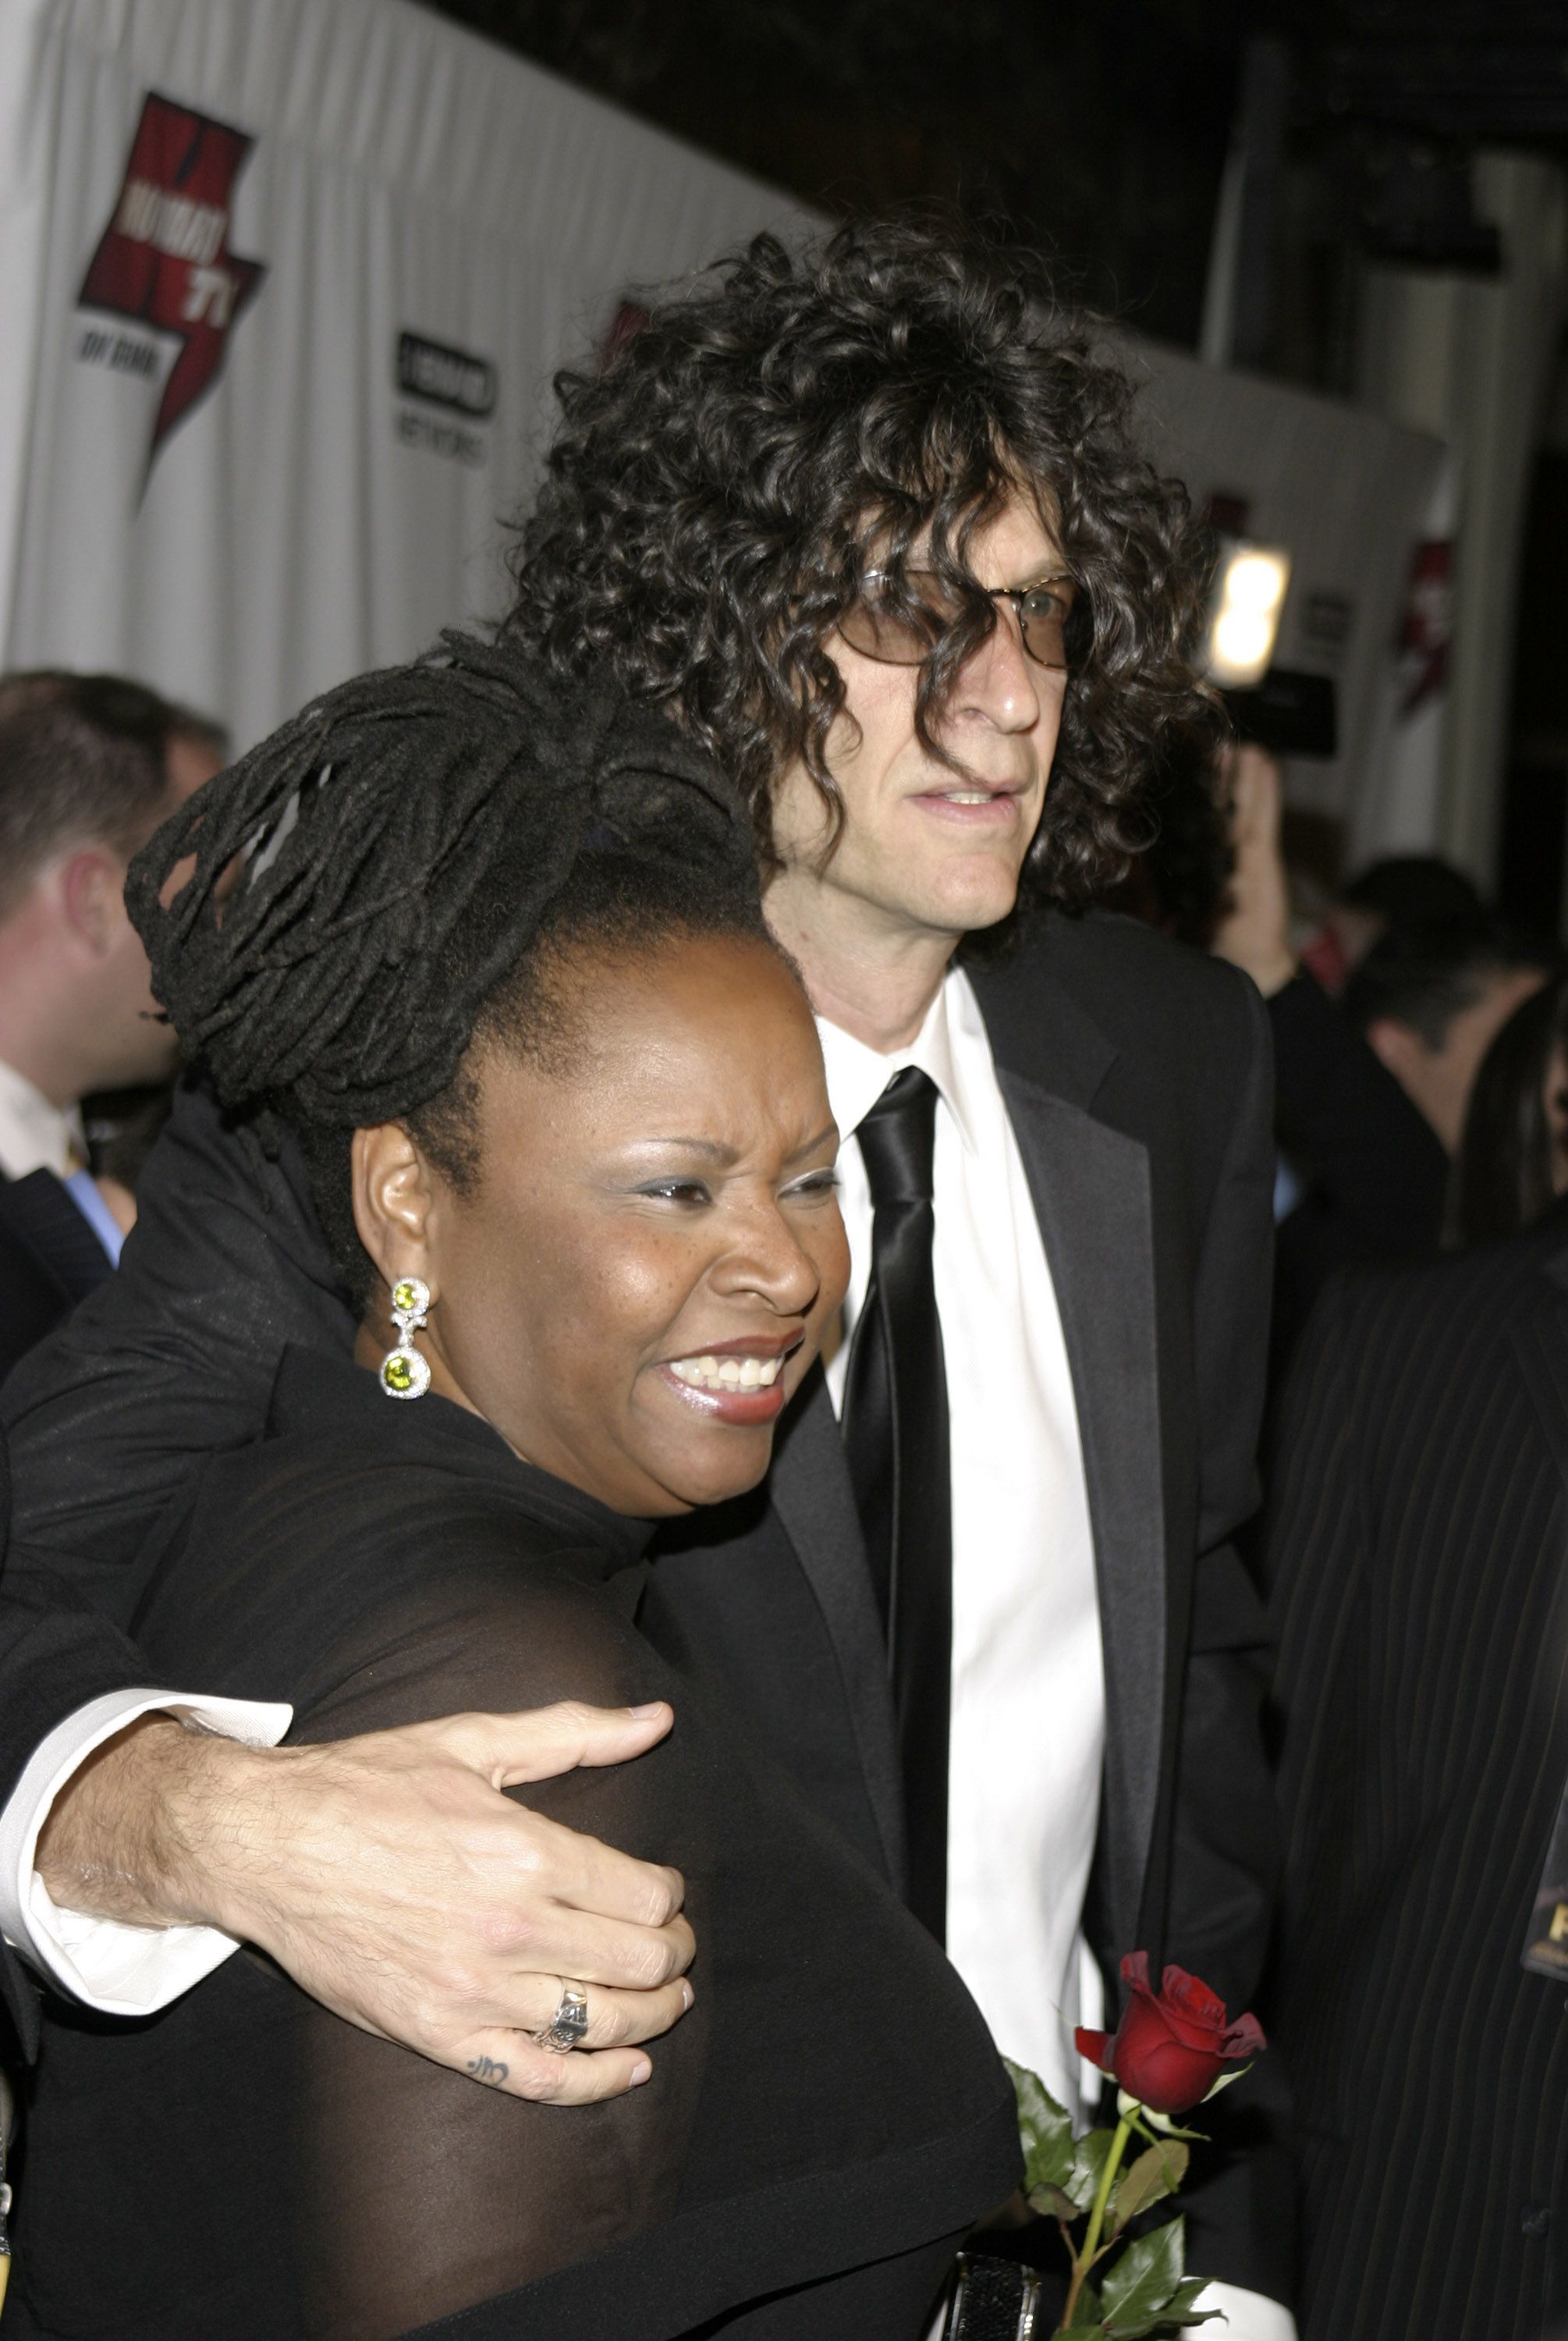 Howard Stern and Robin Quivers at  The Howard Stern Film Festival in New York City | Source: Getty Images